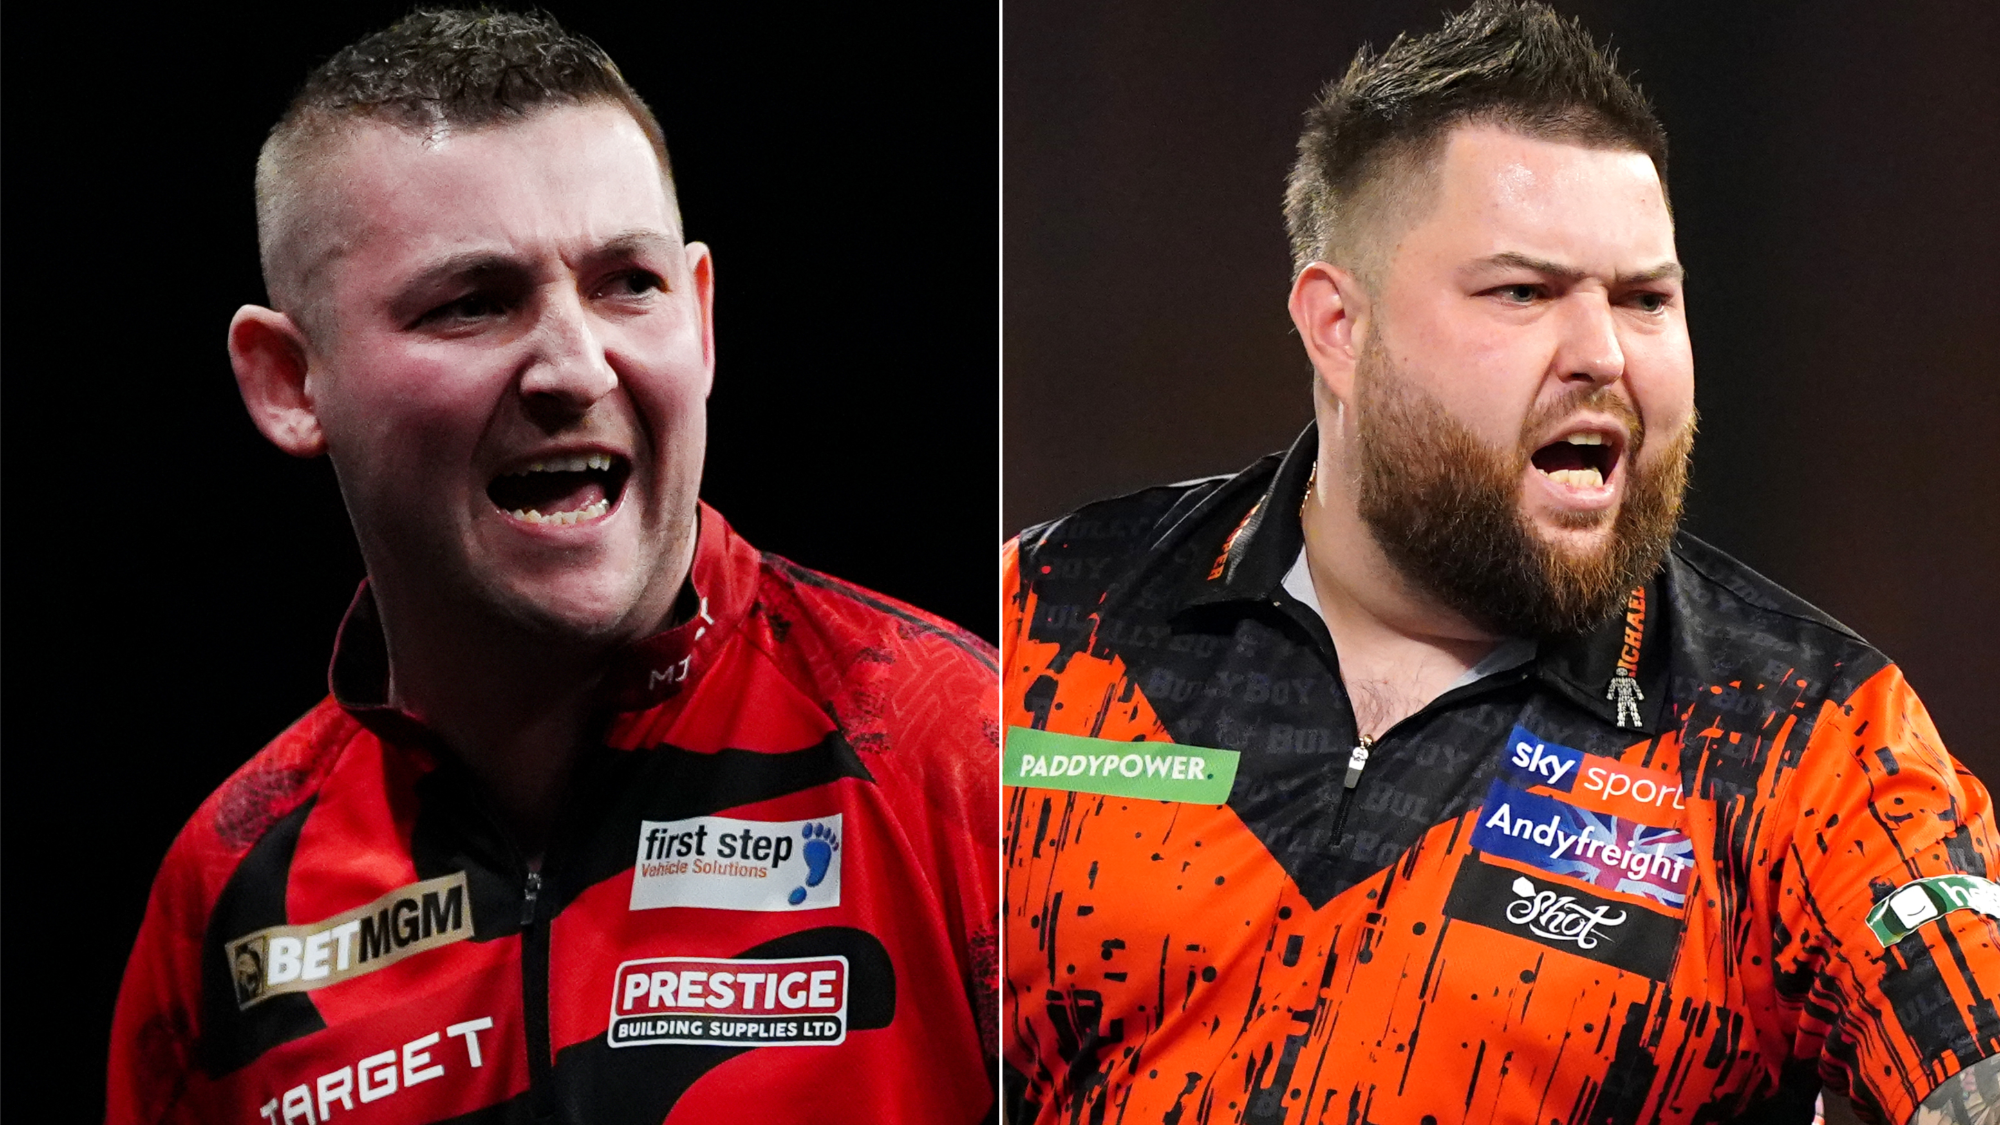 Nathan Aspinall and Michael Smith looking to secure Premier League play-off spot